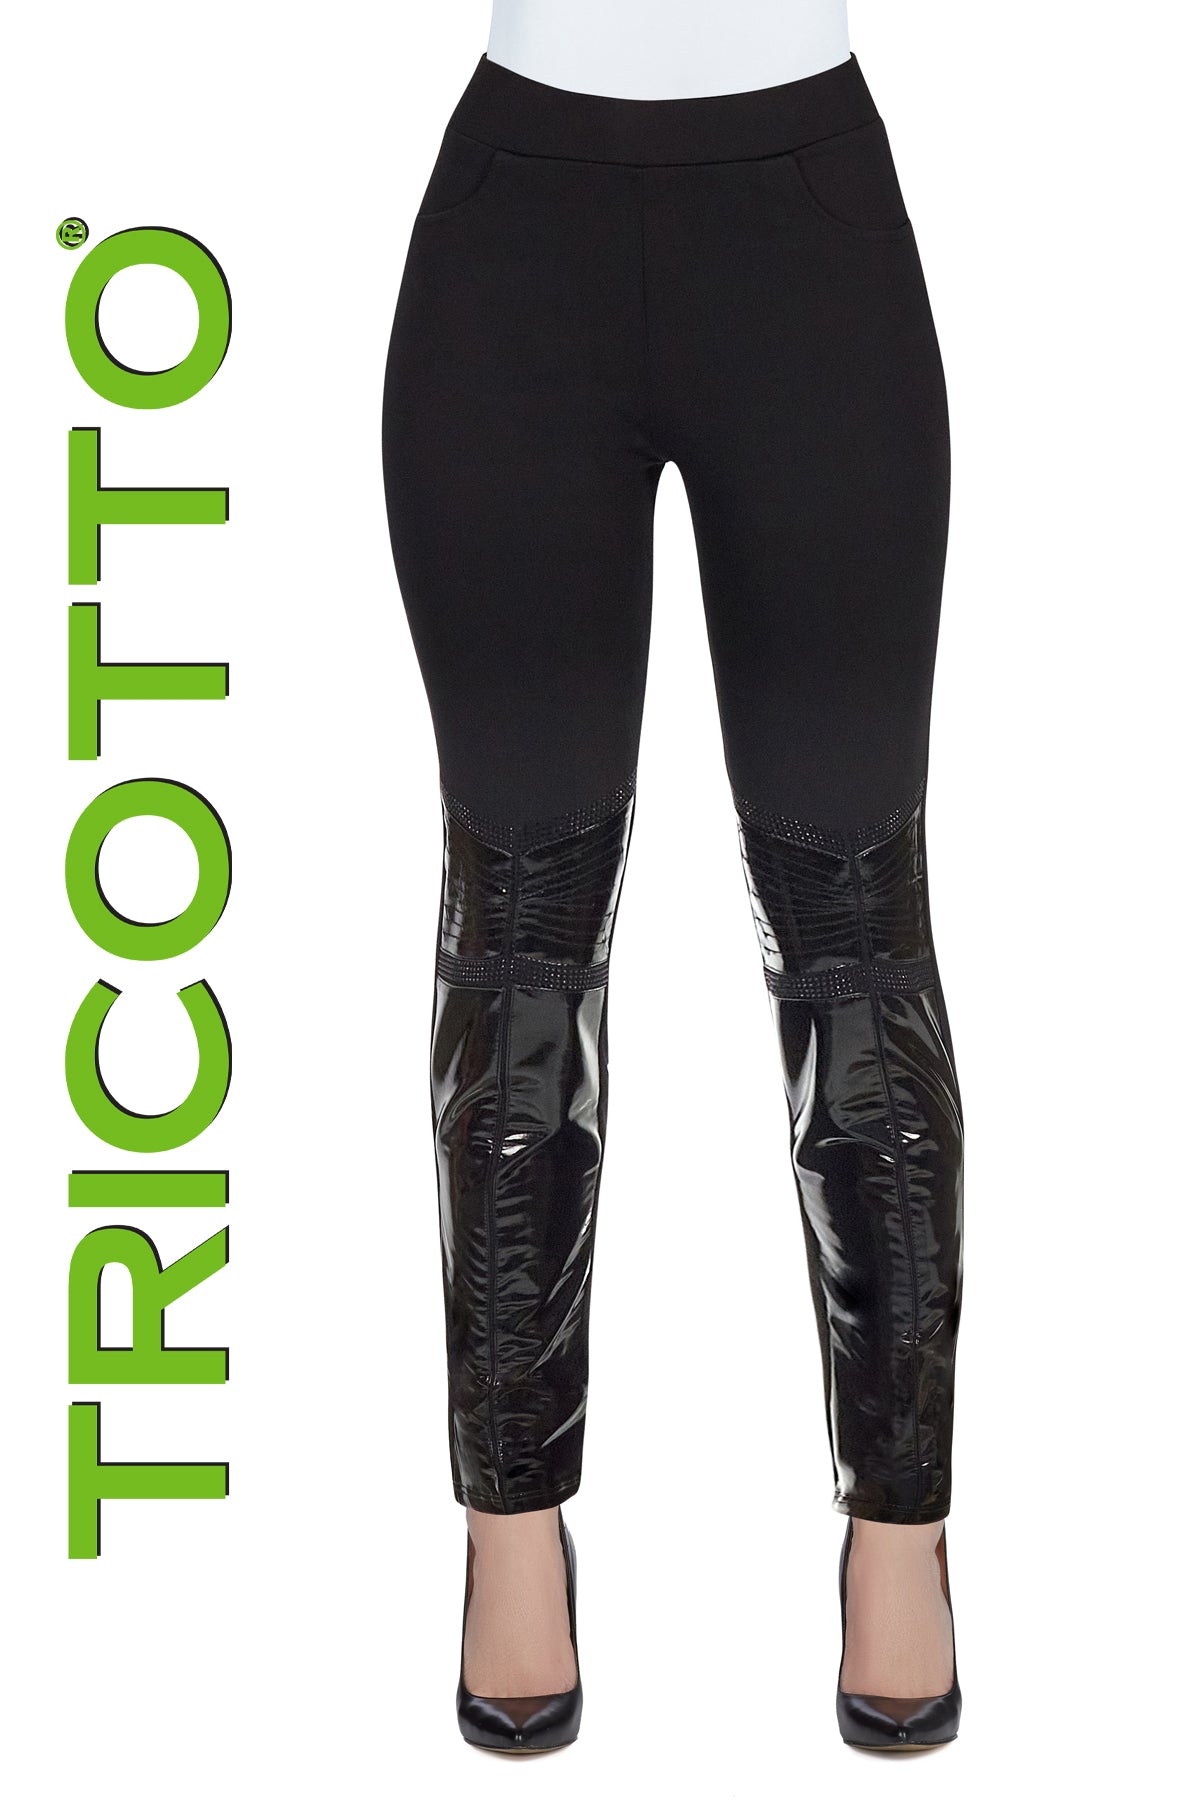 Tricotto Black Pants-Buy Tricotto Pants Online-Tricotto Clothing Montreal-Tricotto Vegan Leather Pants